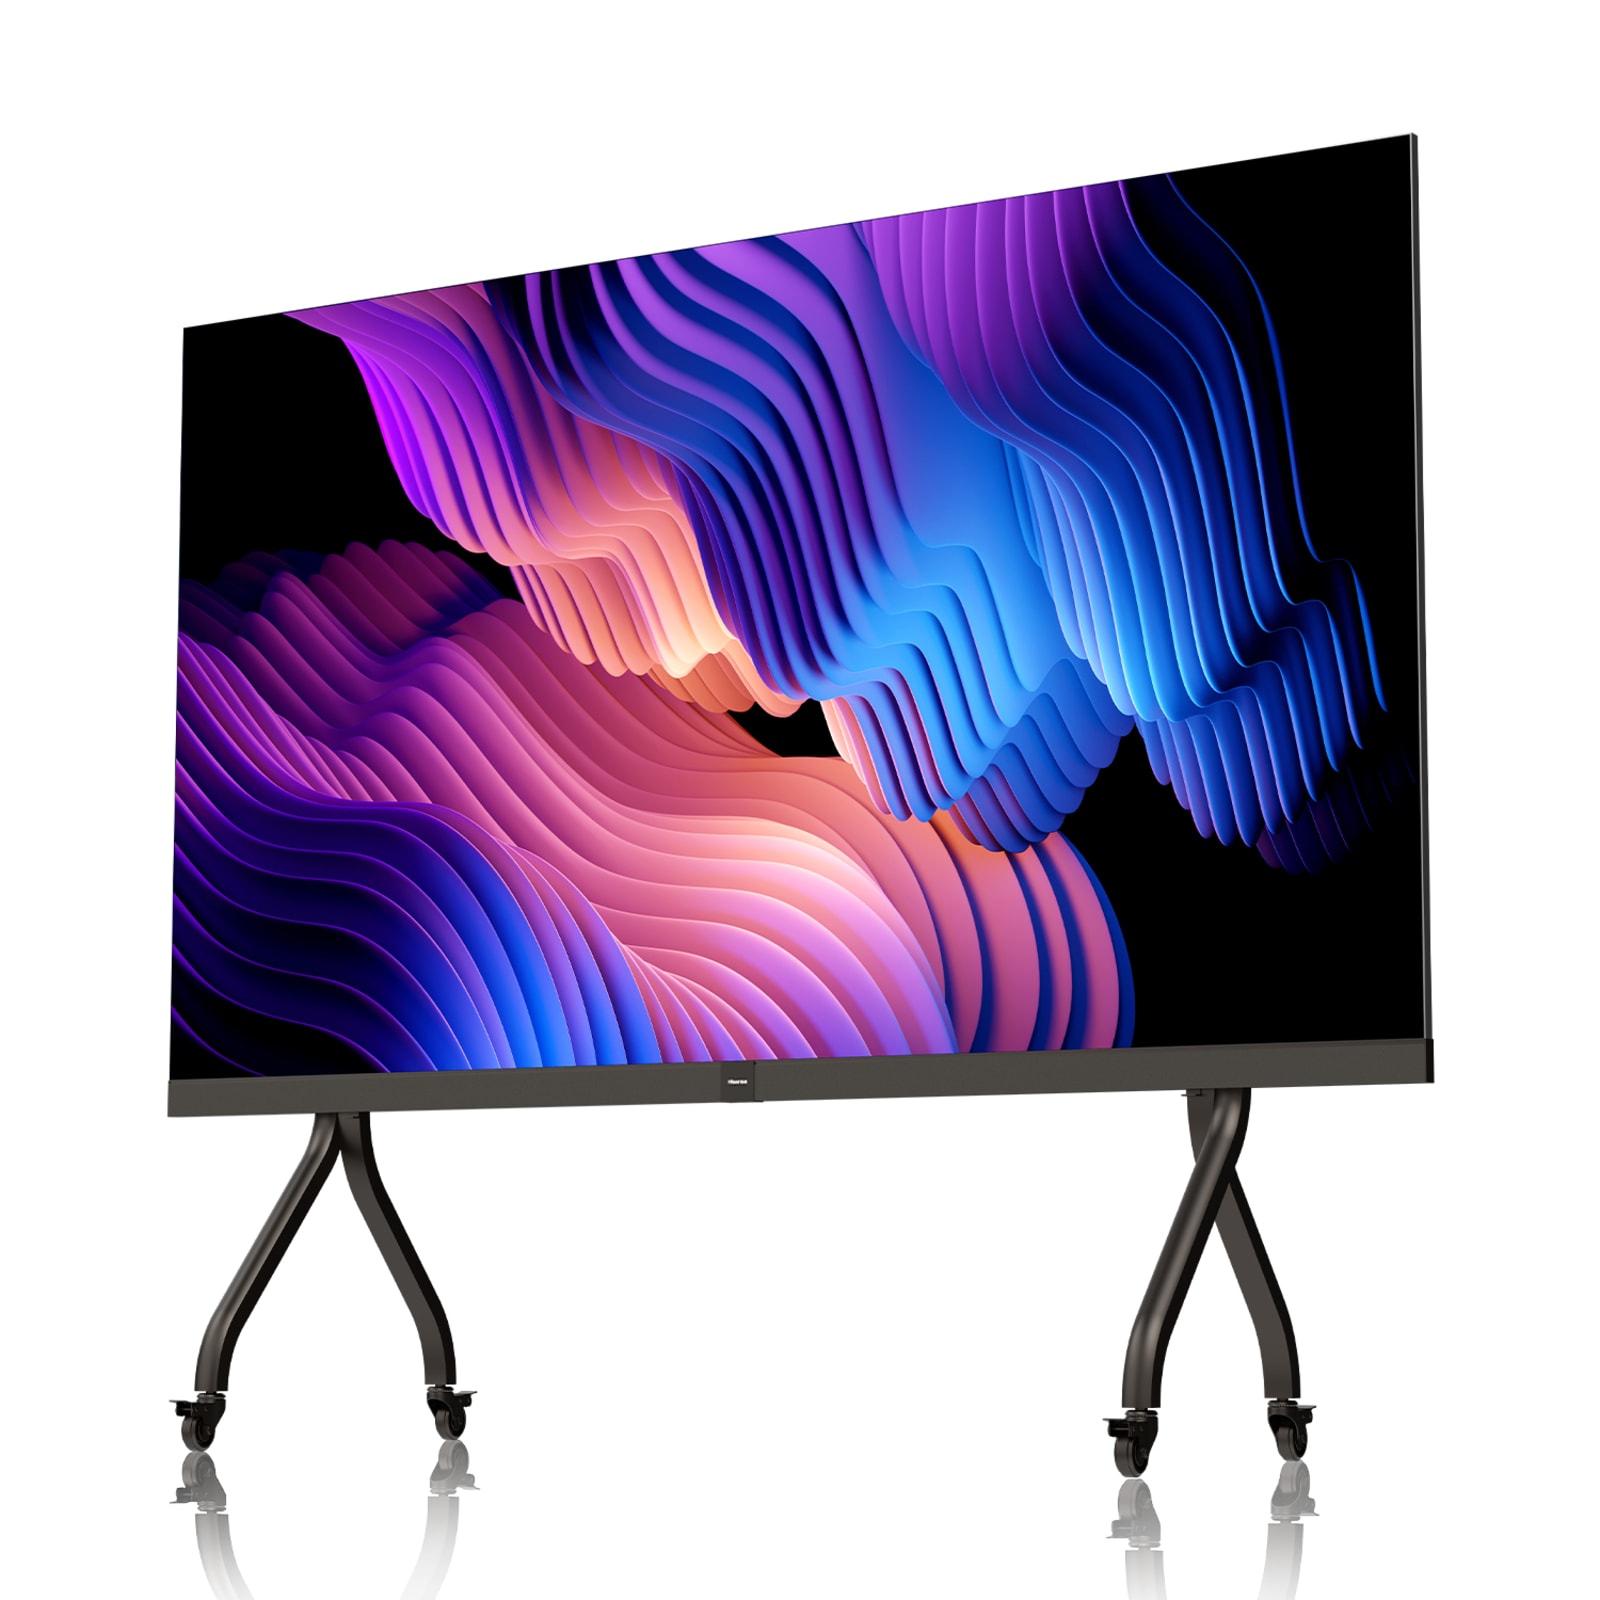 Xiaomi could be working on a 100-inch smart TV 